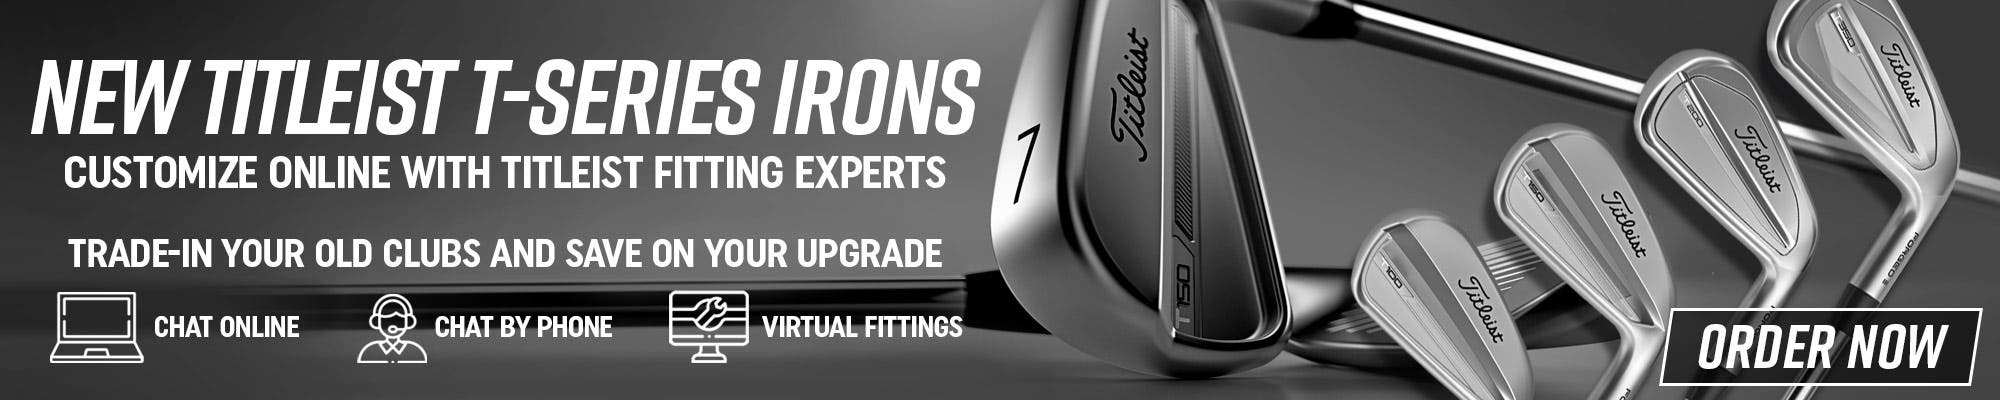 New Titleisty T-Series Irons - Customize Online With Titleist Fitting Experts - Trade In Your Old Clubs And Save On Your Upgrade | Chat Online - Chat By Phone - Virtual Fittings | Pre-Order Now